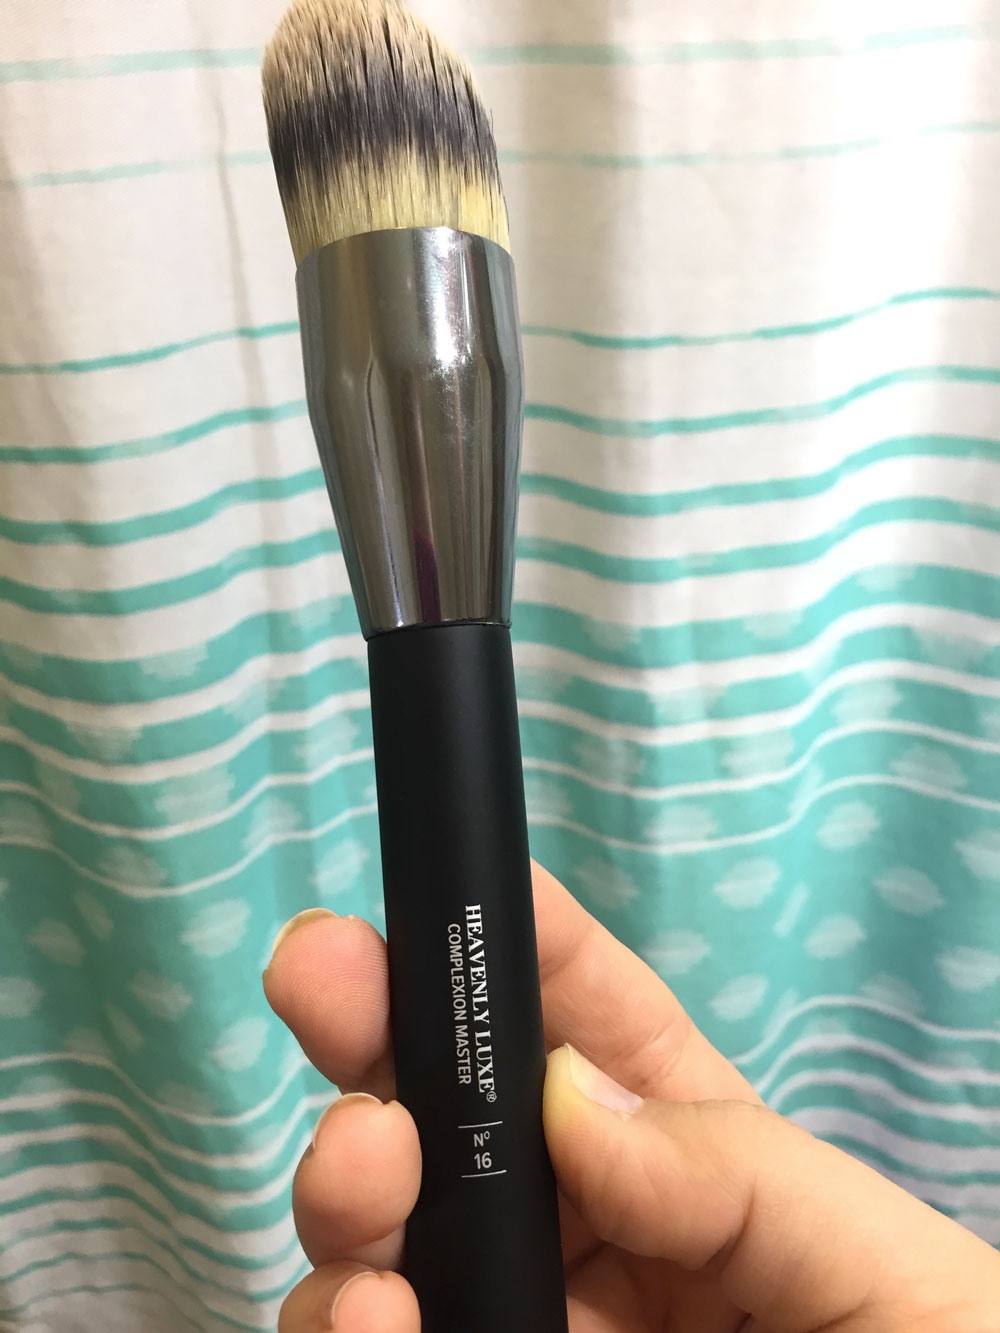 Heavenly Luxe Complexion Master No. 16 brush